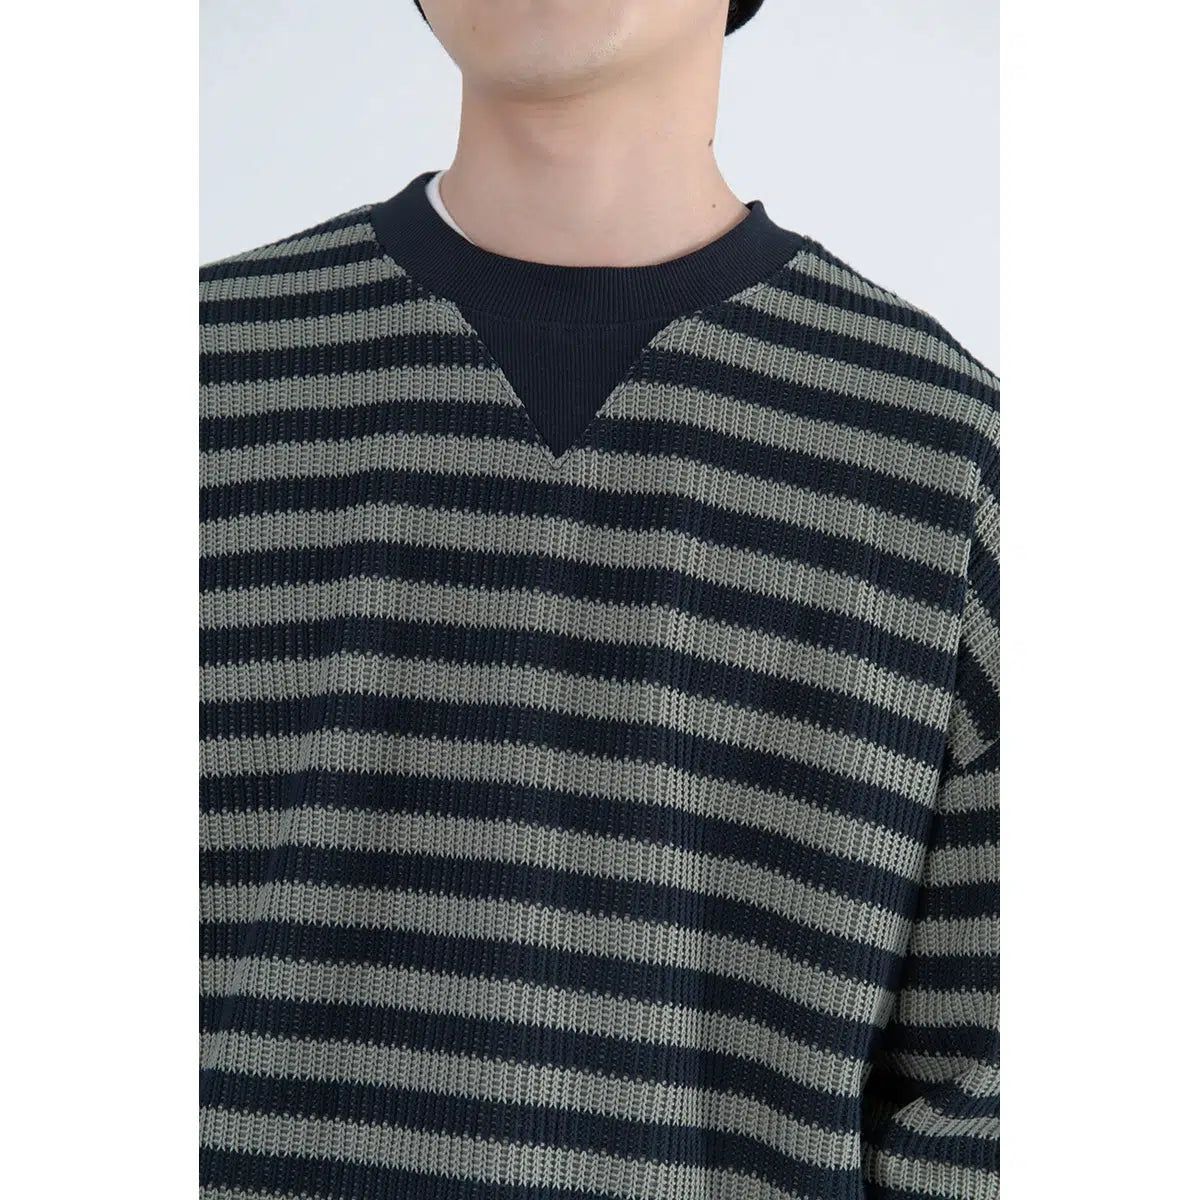 Casual Striped Comfty Sweater Korean Street Fashion Sweater By Mentmate Shop Online at OH Vault